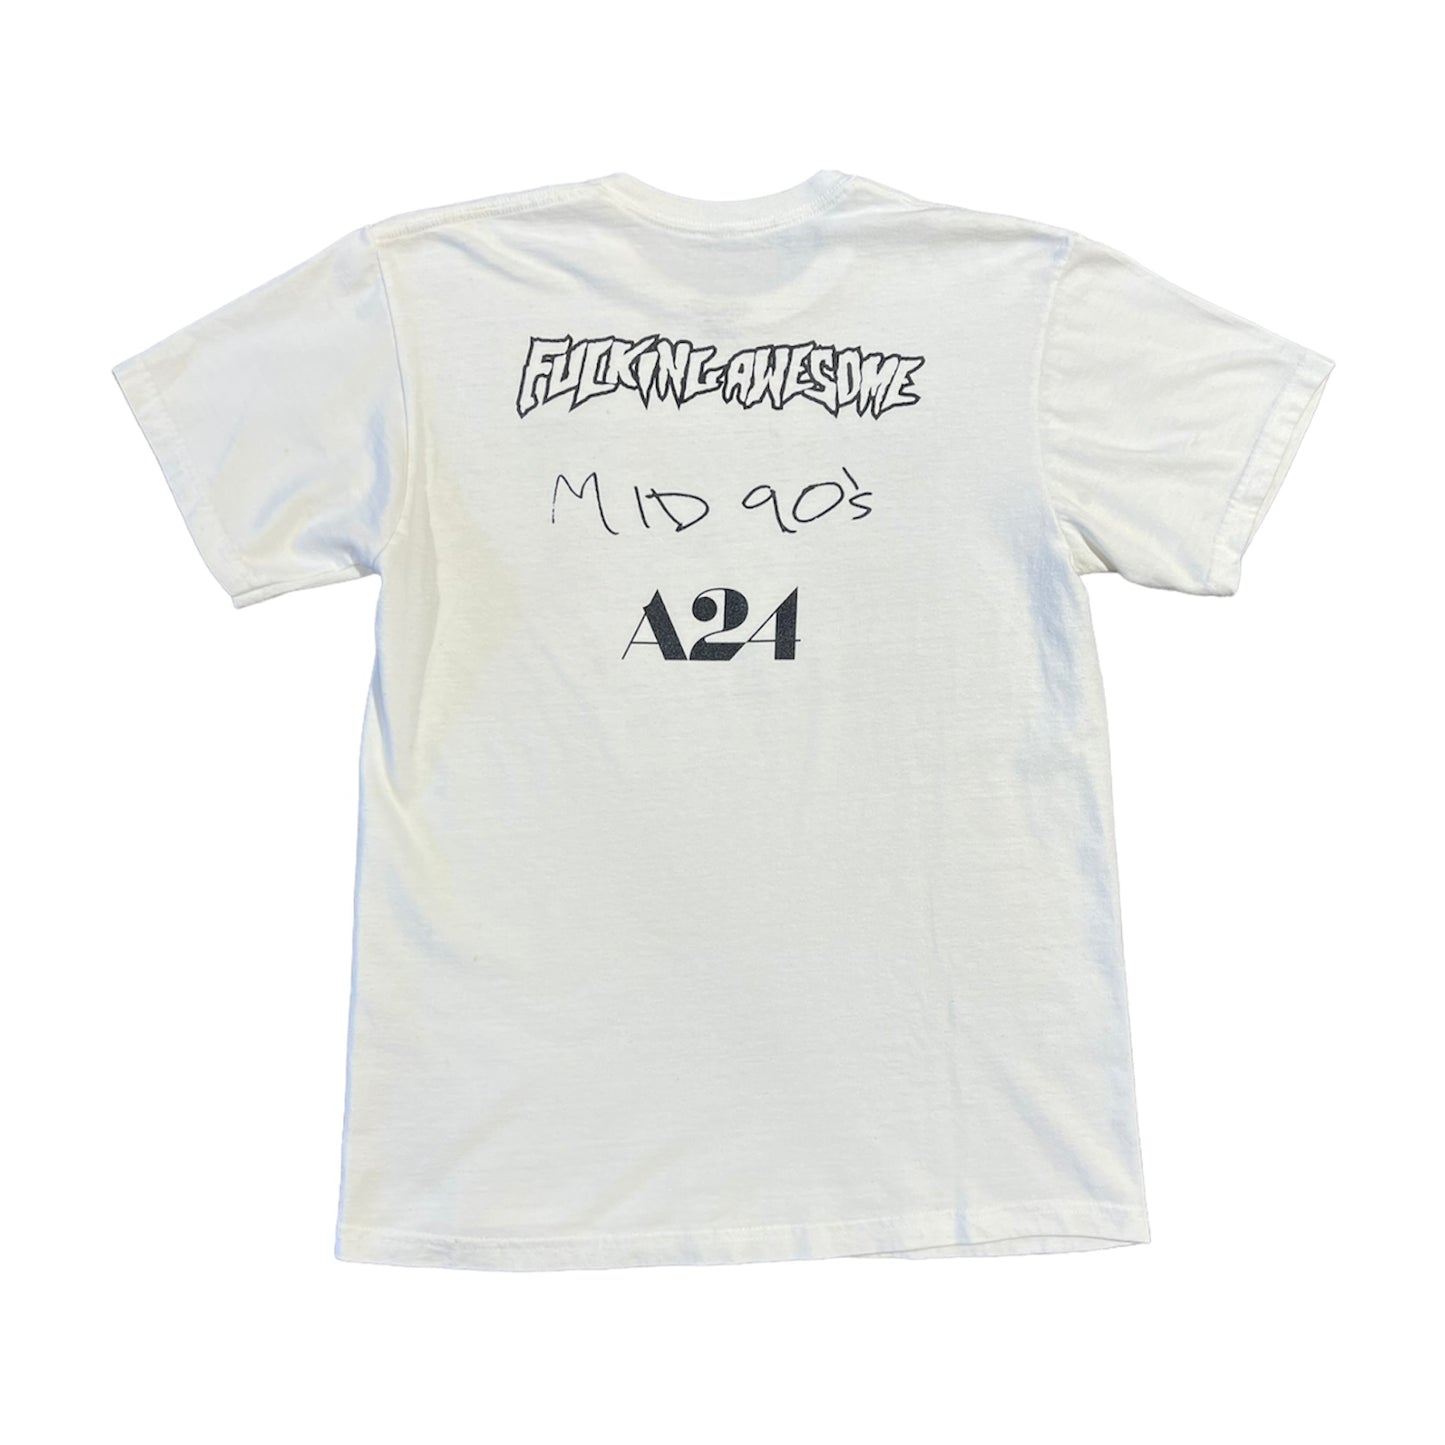 A24 x Fucking Awesome Mid90s (2018) Tee (Size M)